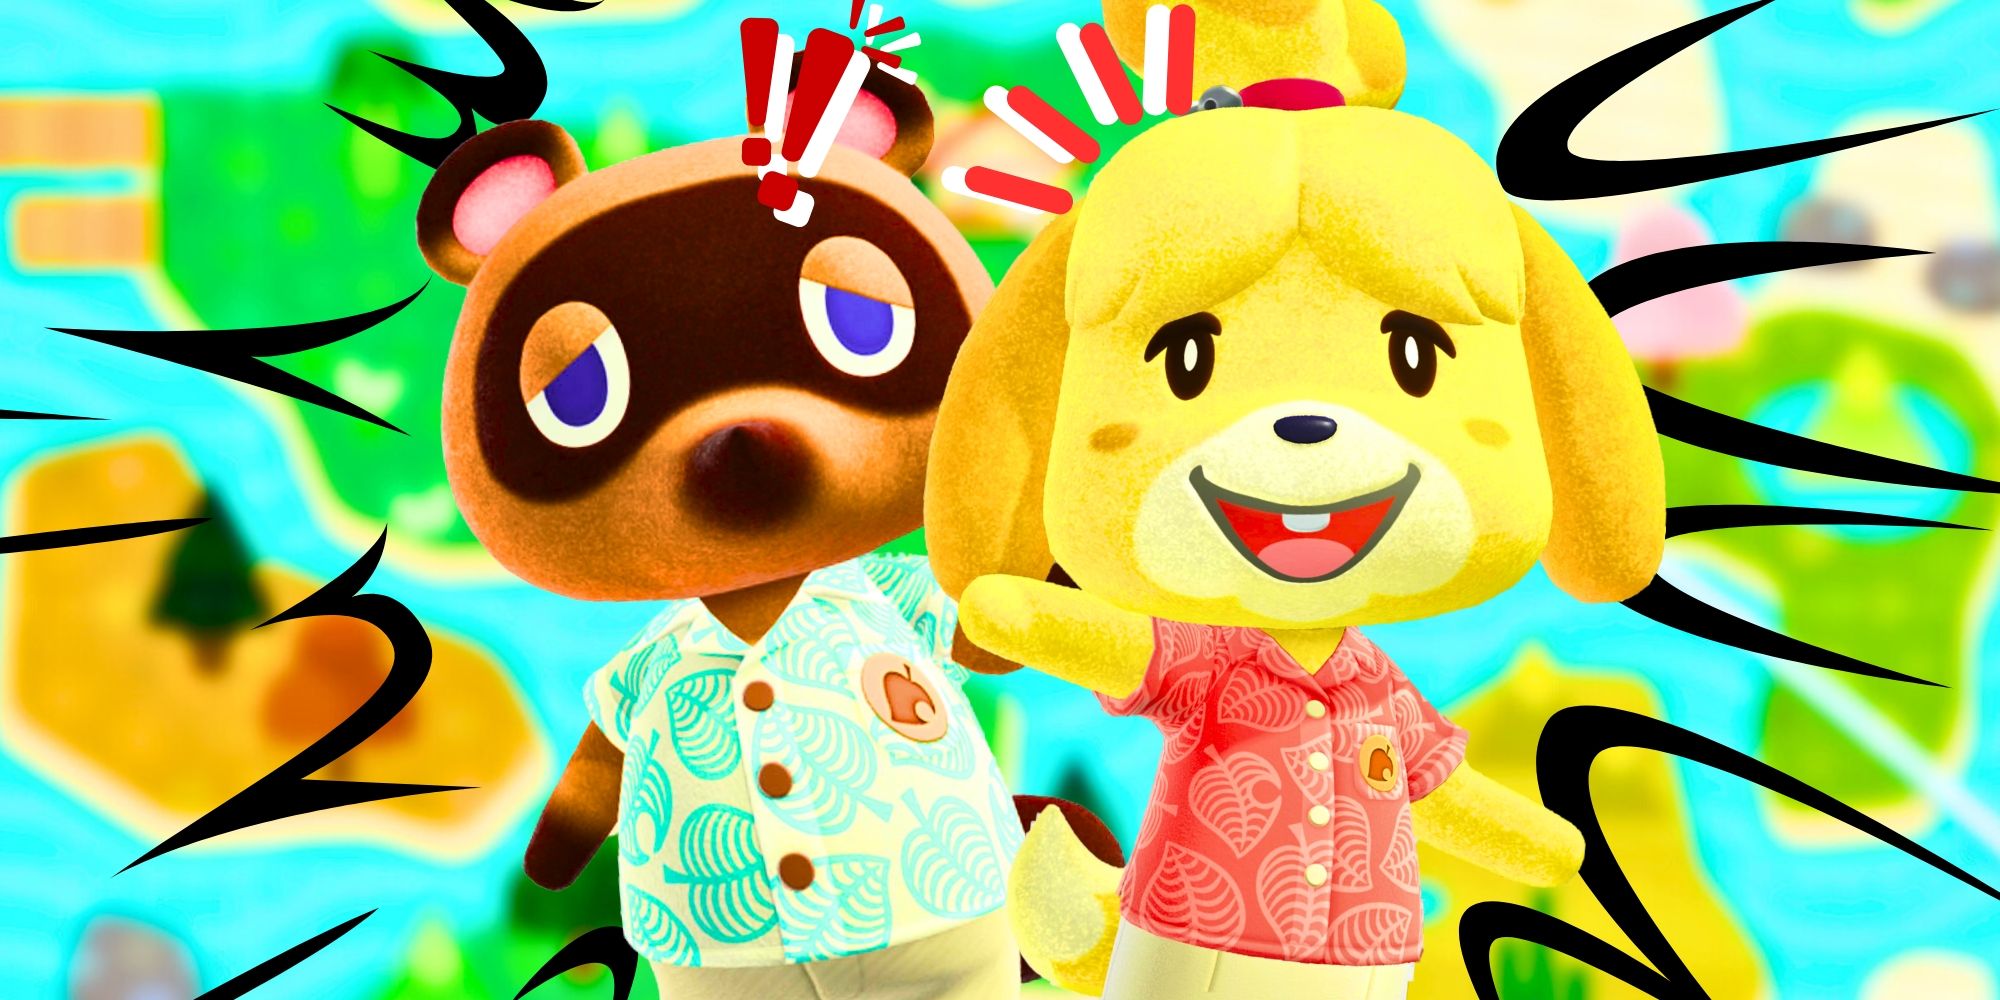 Tom Nook and Isabelle From Animal Crossing New Horizons